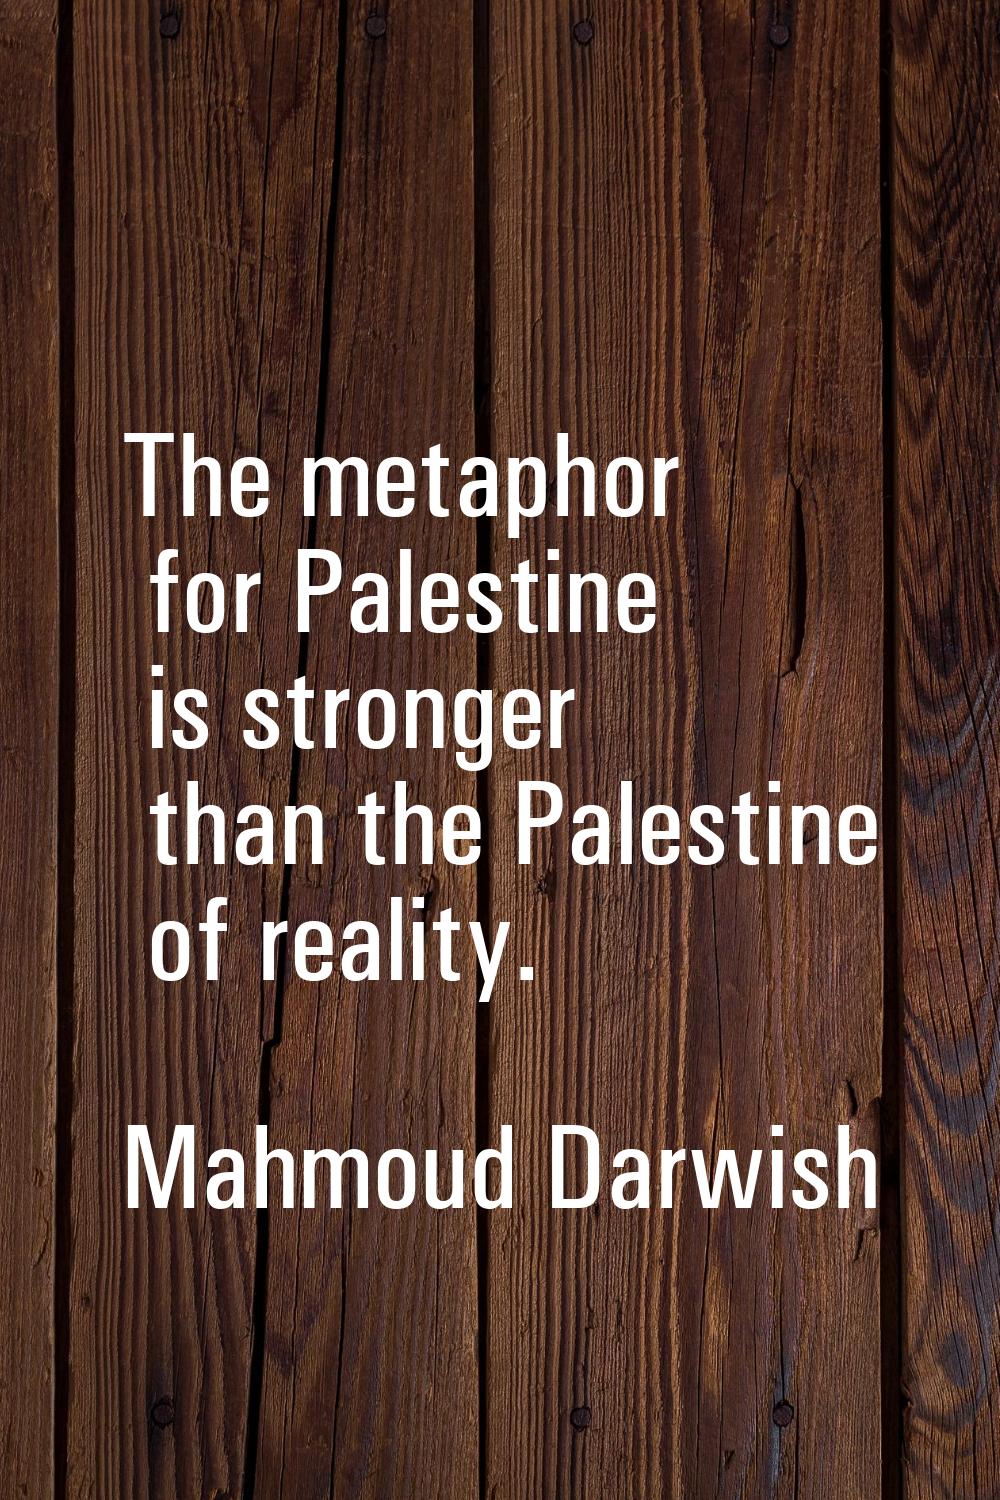 The metaphor for Palestine is stronger than the Palestine of reality.